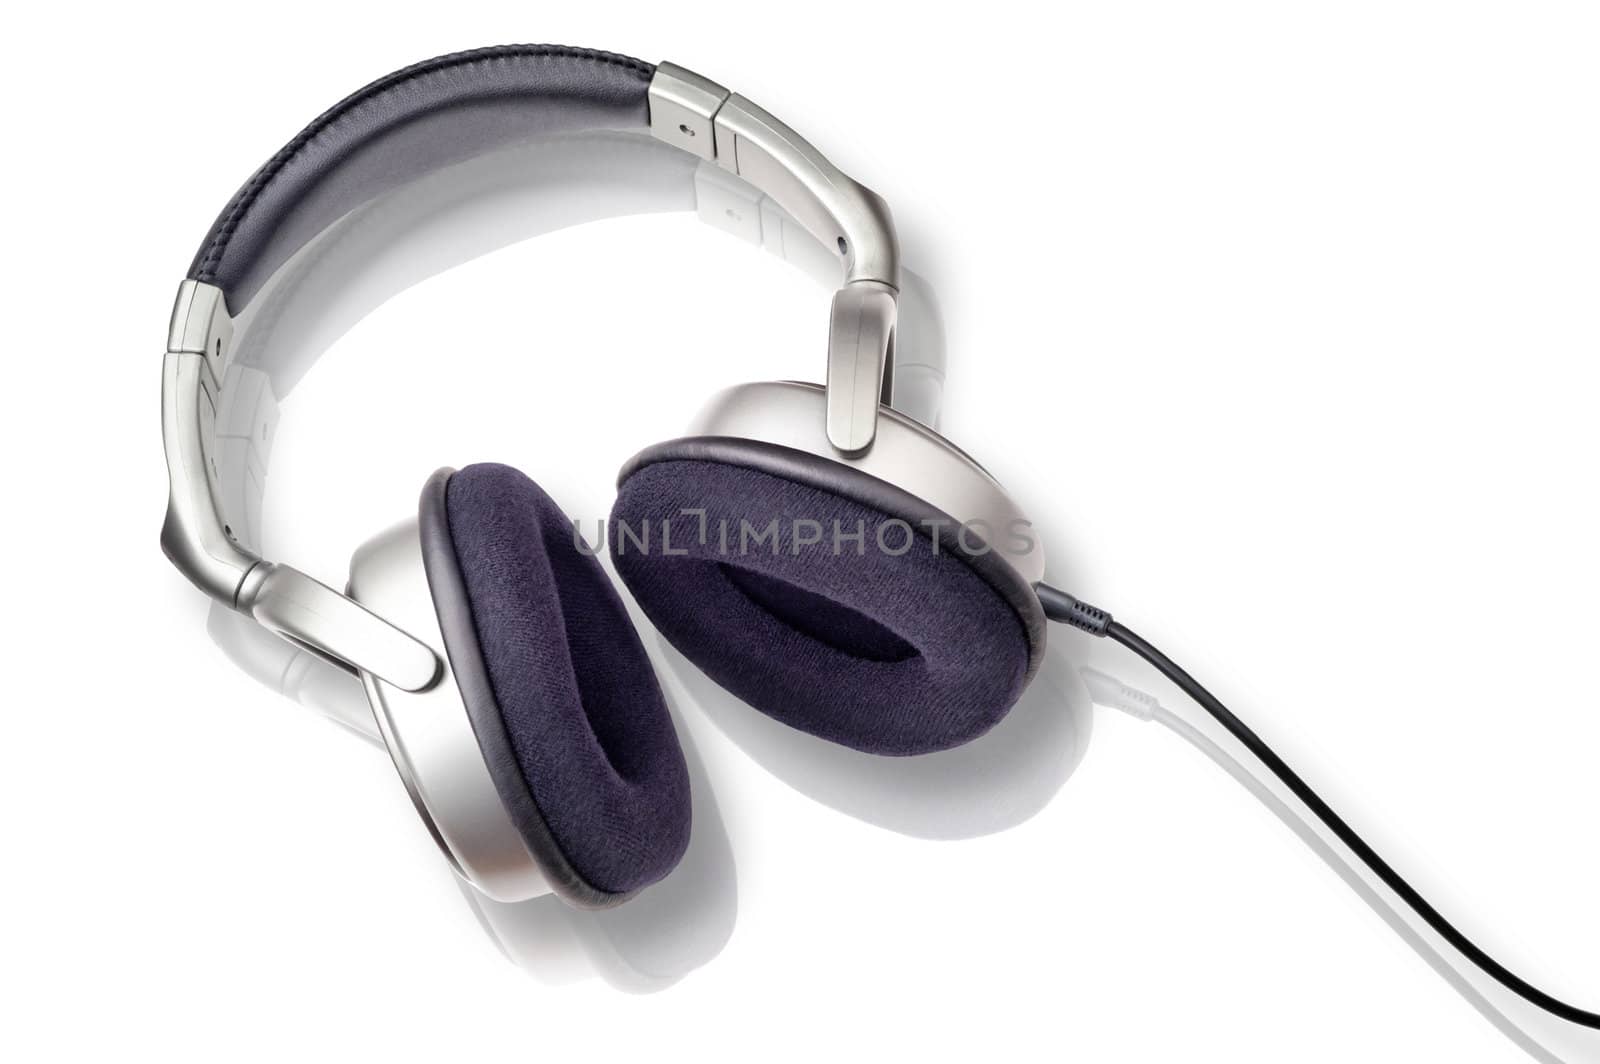 Earphones with clipping path